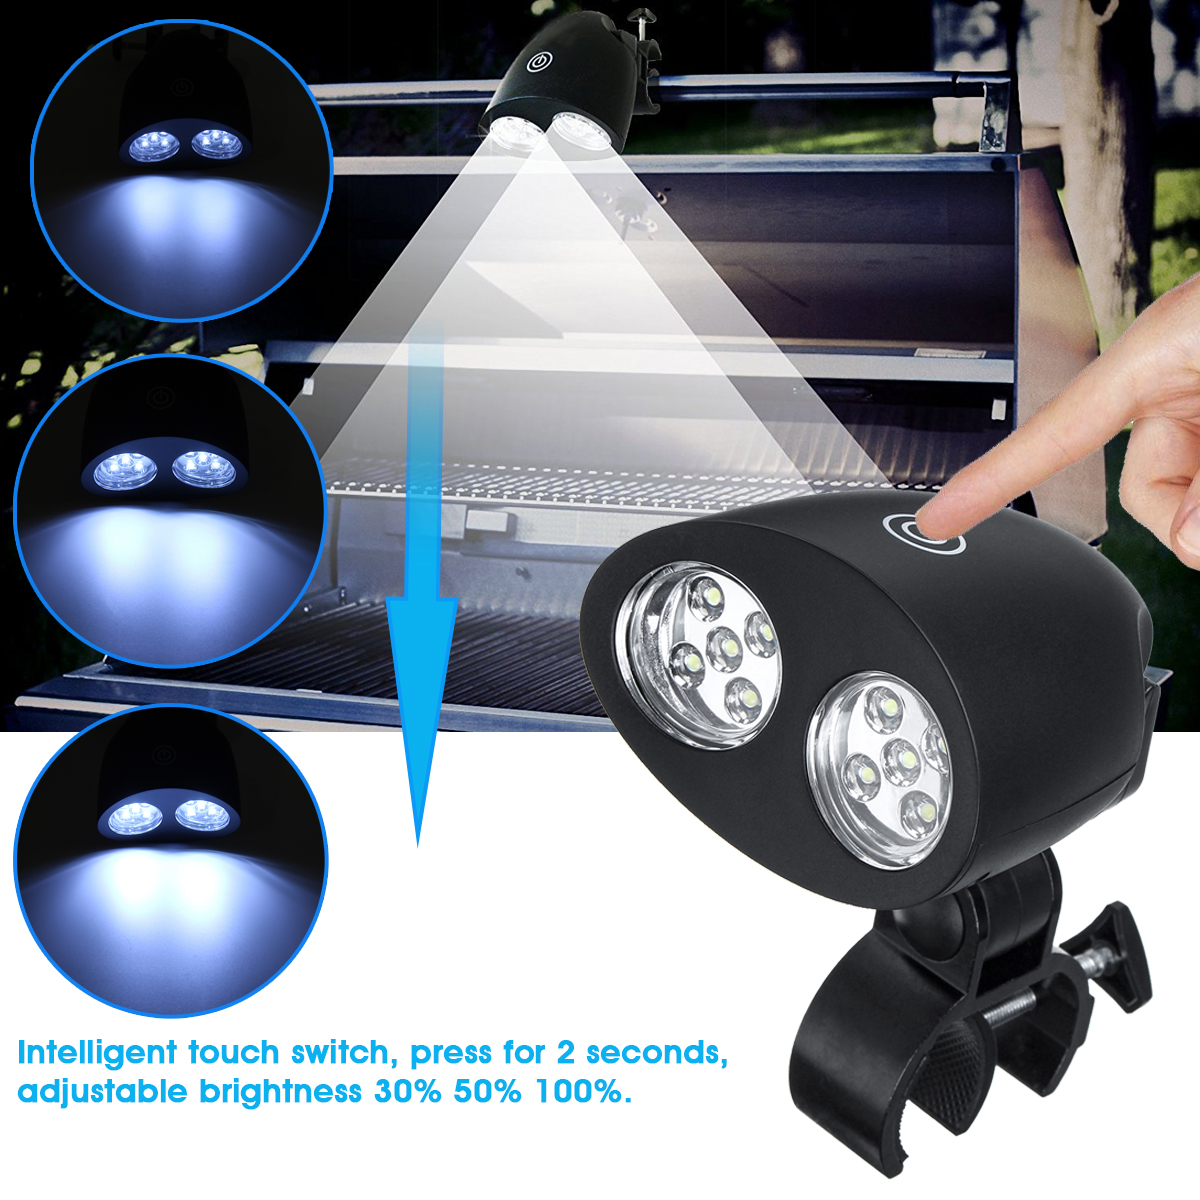 BBQ-Grill-Light-Camping-Picnic-Durable-Super-Bright-10-Led-Battery-Powered-Barbecue-Lamp-1613019-5